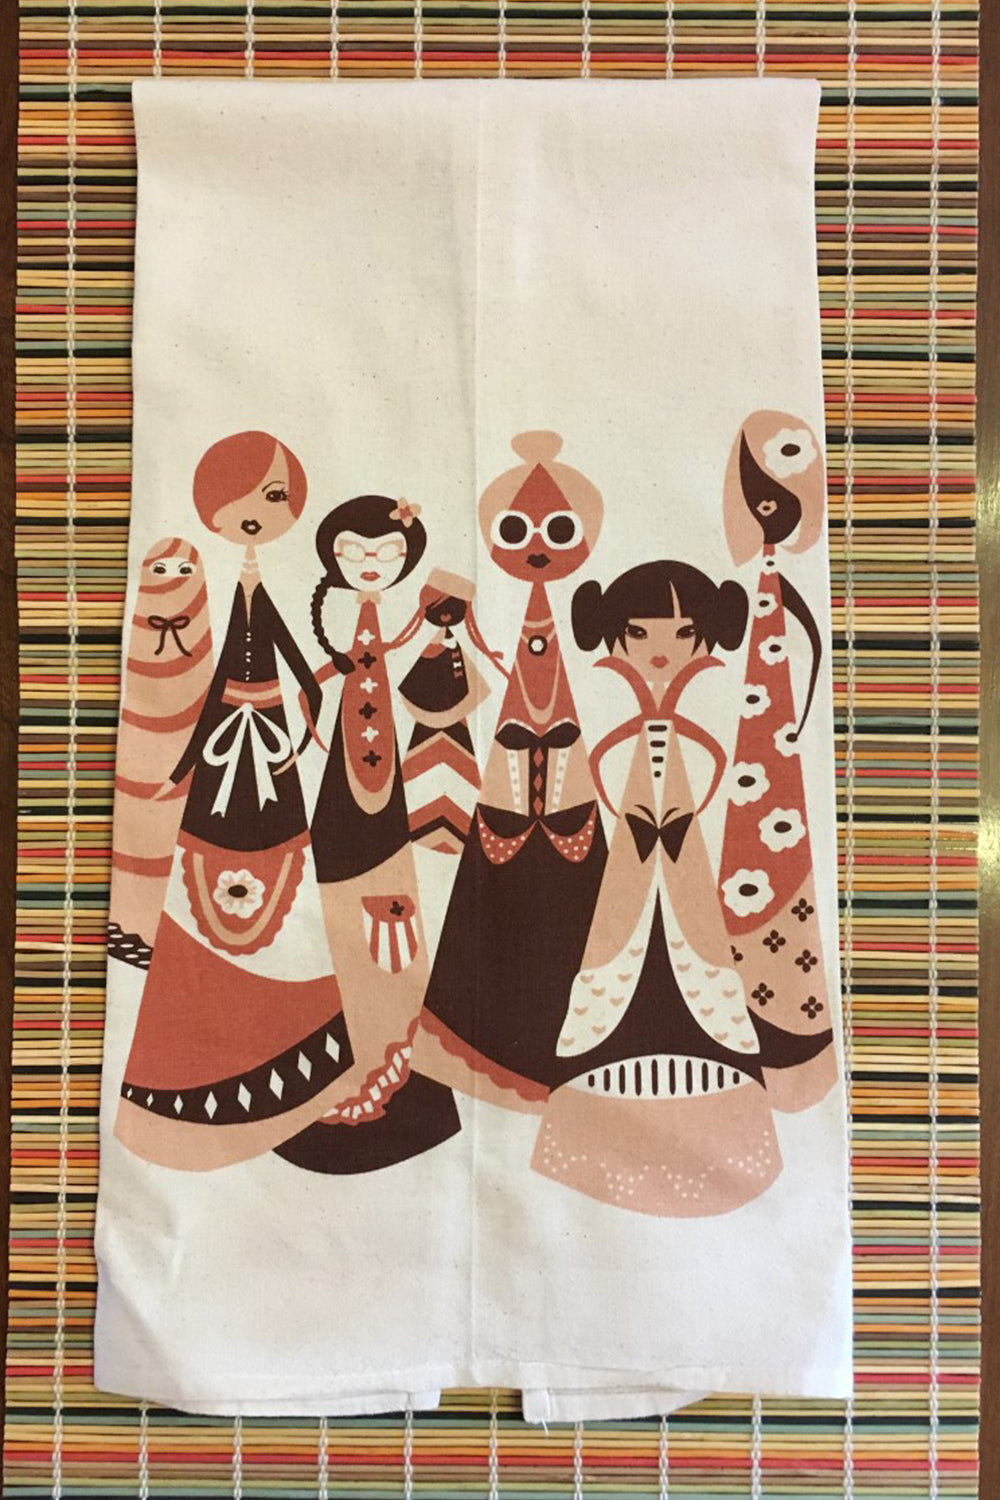 A dish towel featuring a variety of women